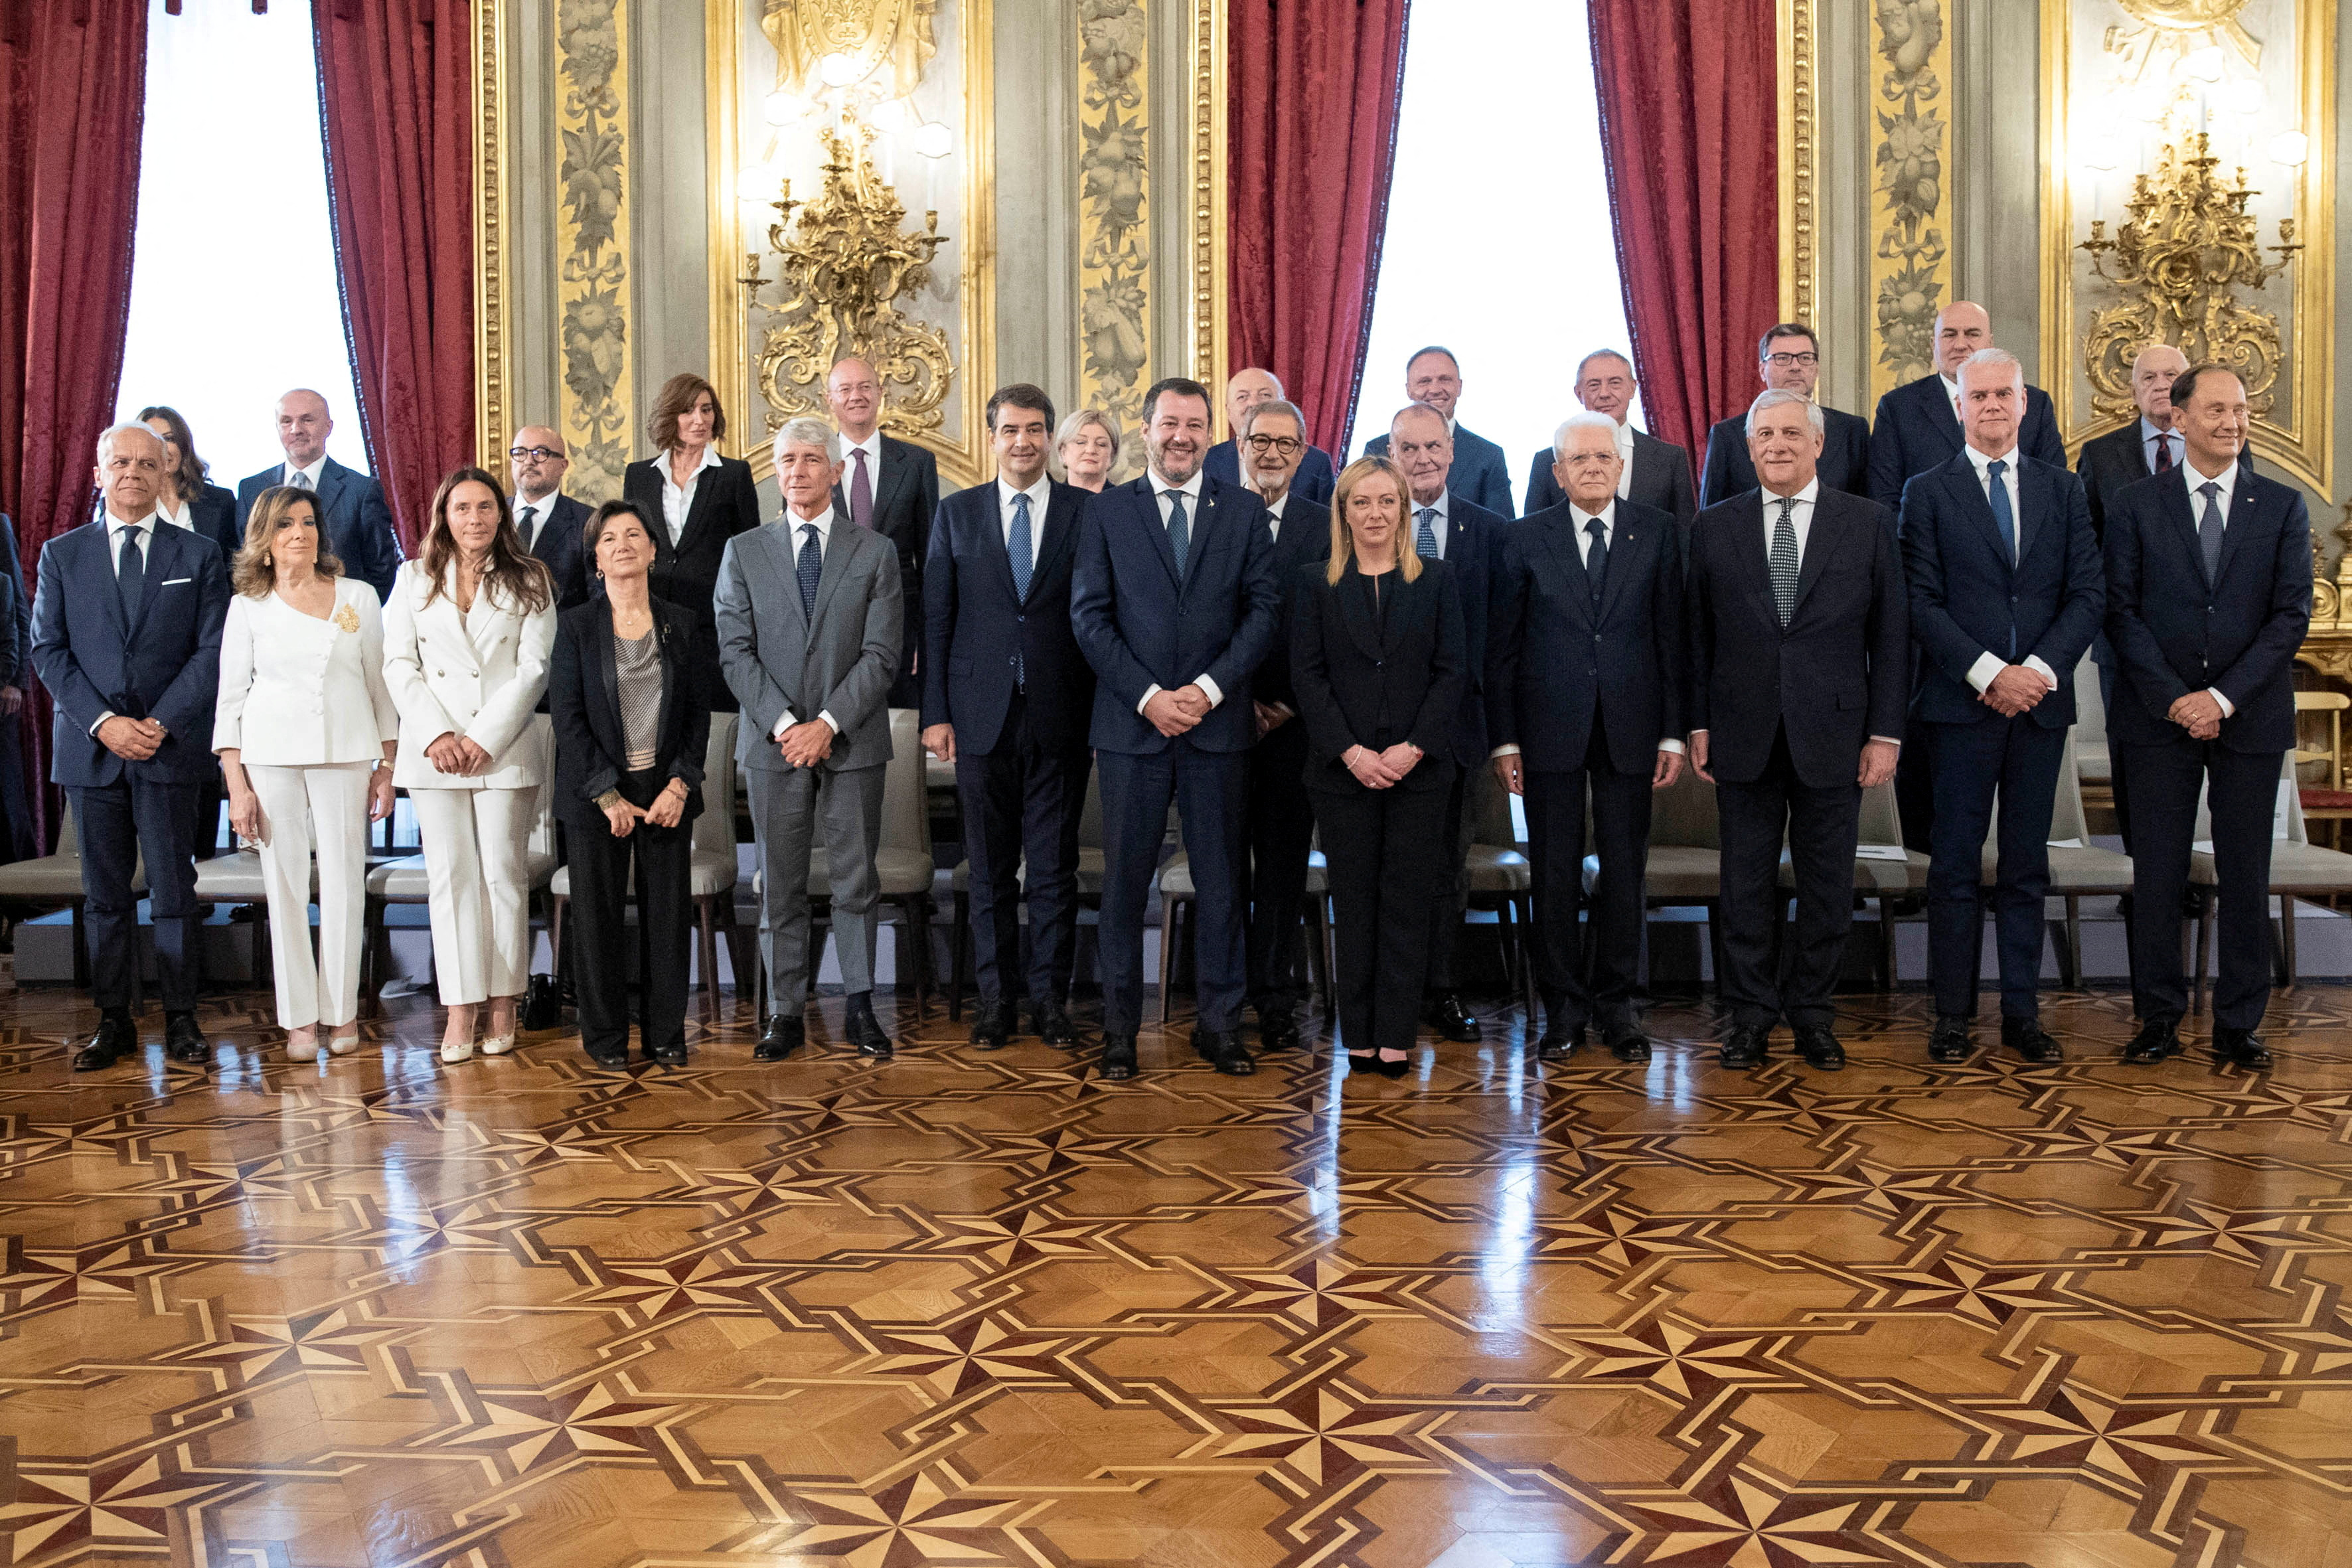 Swearing-in ceremony at Quirinale Palace in Rome